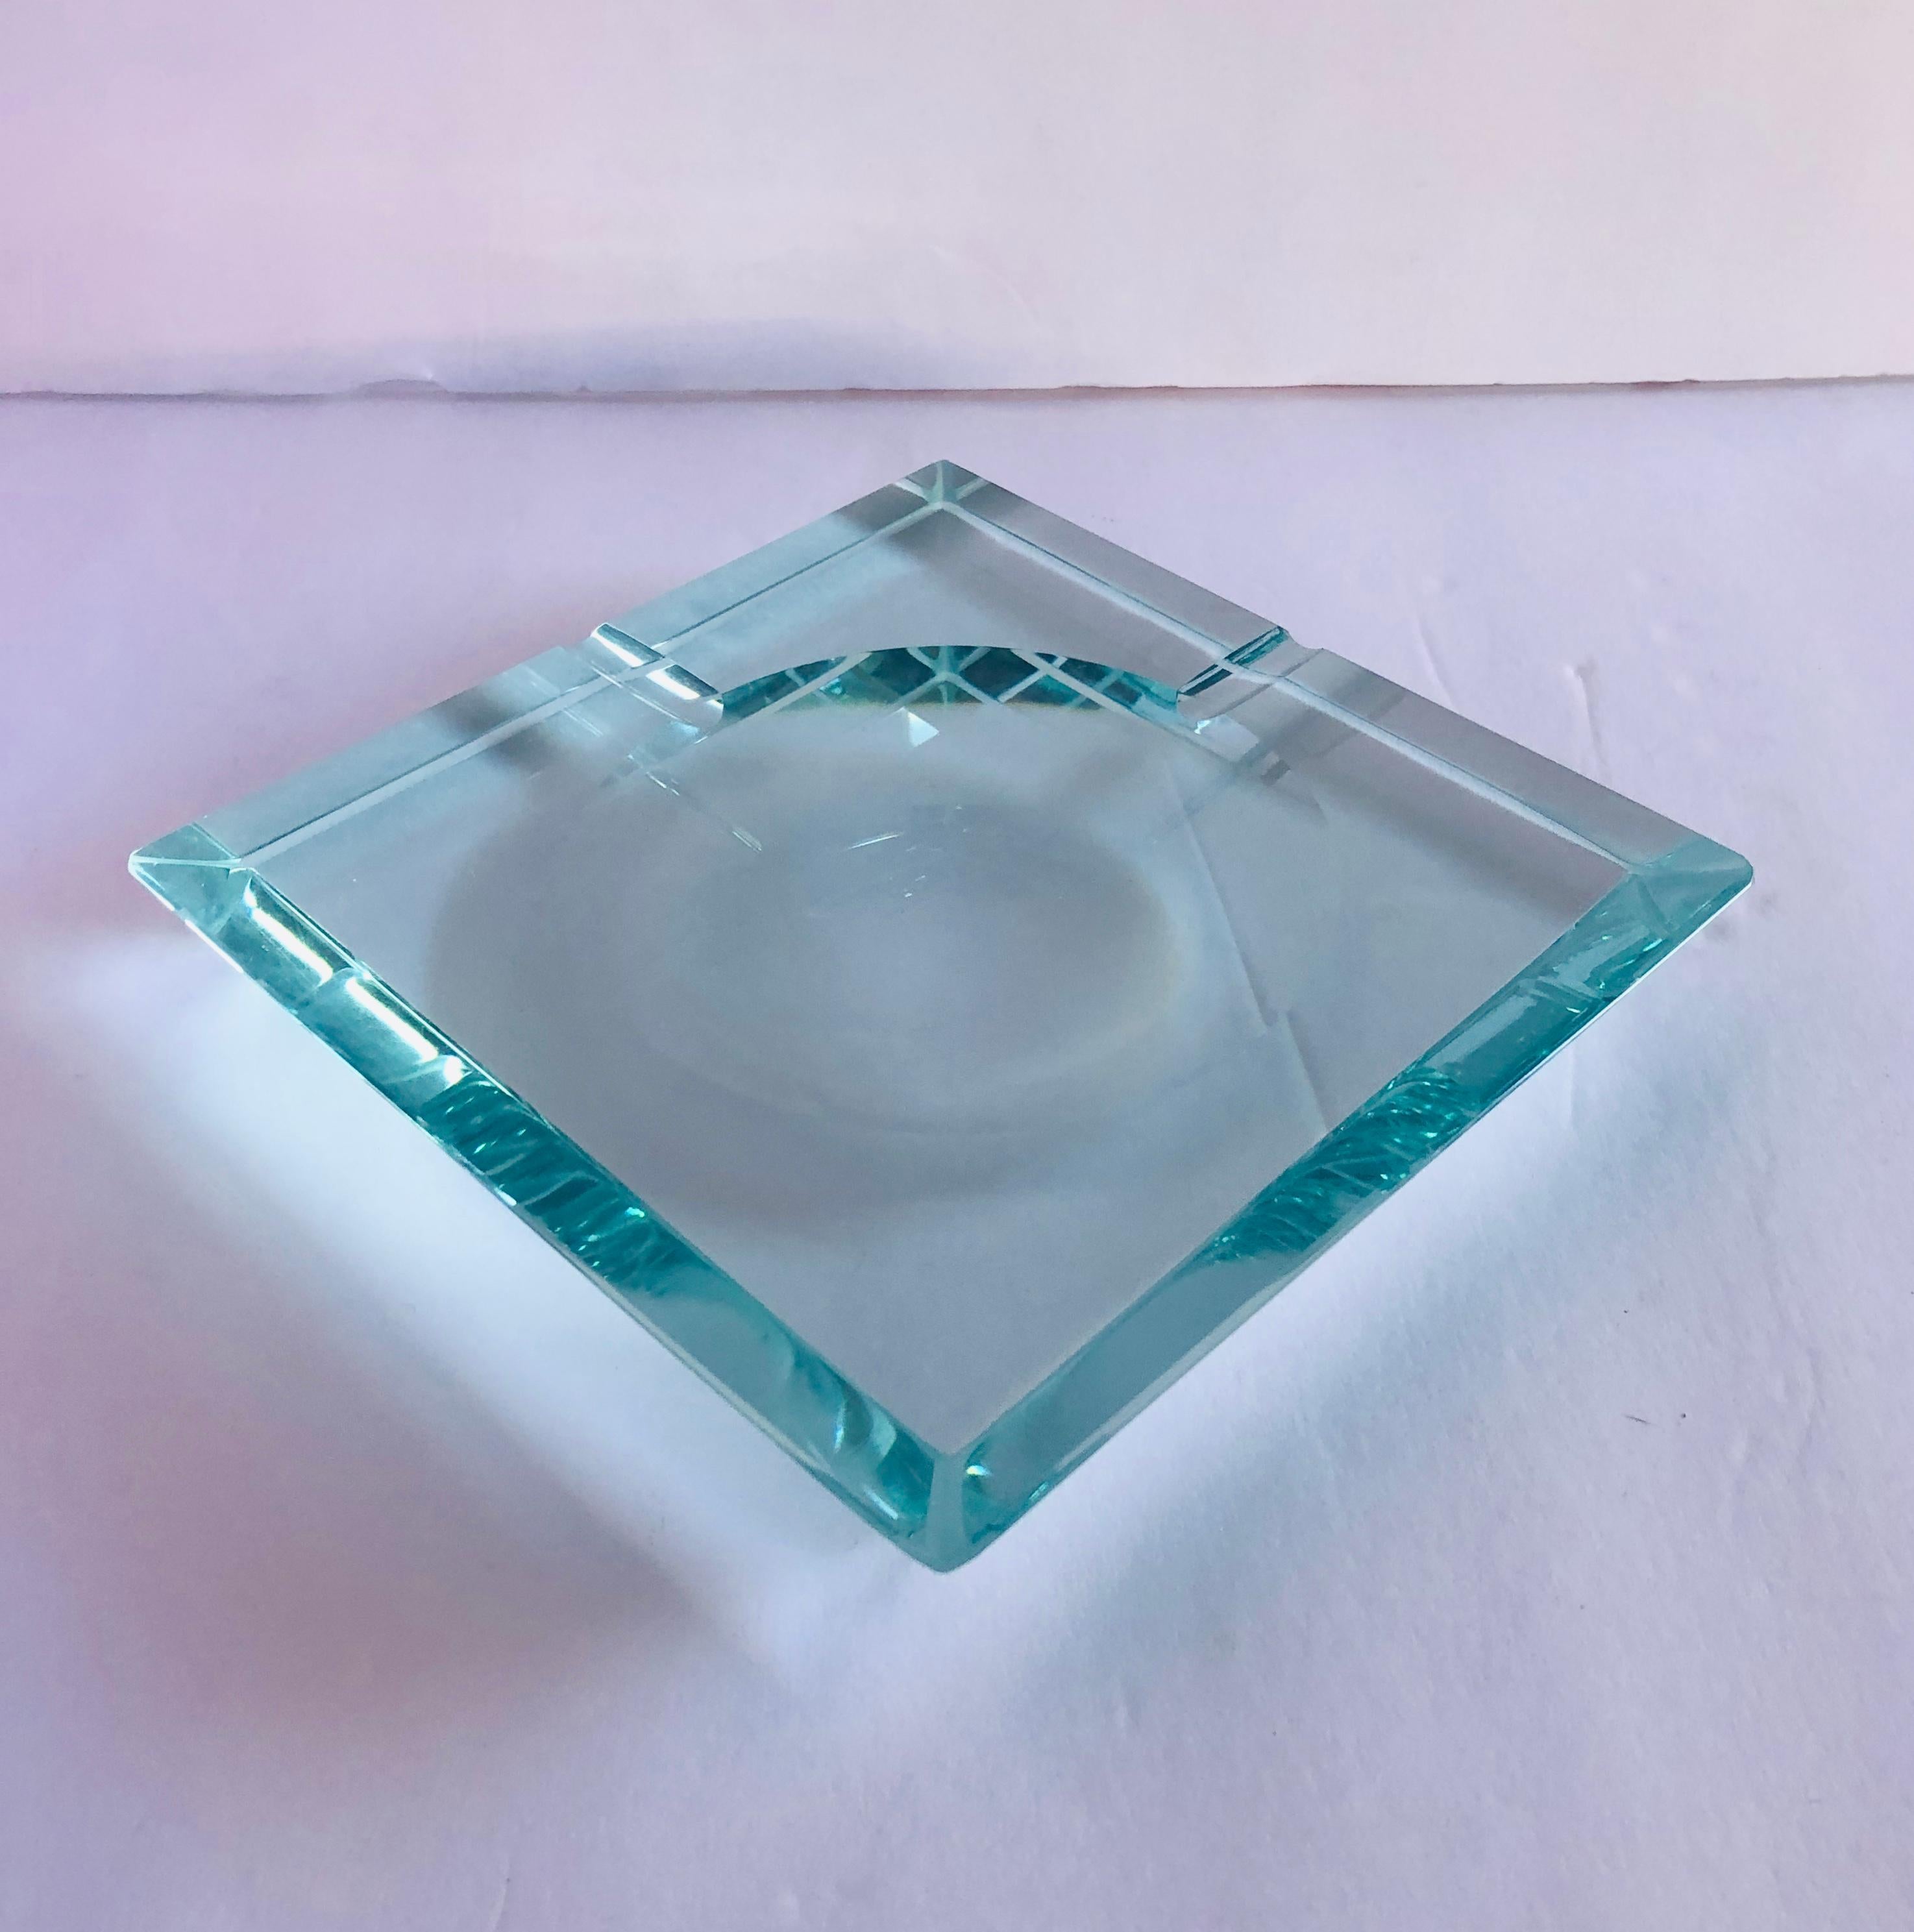 Vintage Italian beveled glass ashtray by Fontana Arte / Made in Italy circa 1960s
Measures: Length 6.5 inches / width 6.5 inches / height 1 inch
1 in stock in Palm Springs ON 20% OFF SALE for $792 !!!
Order Reference: FABIOLTD G77
This piece makes